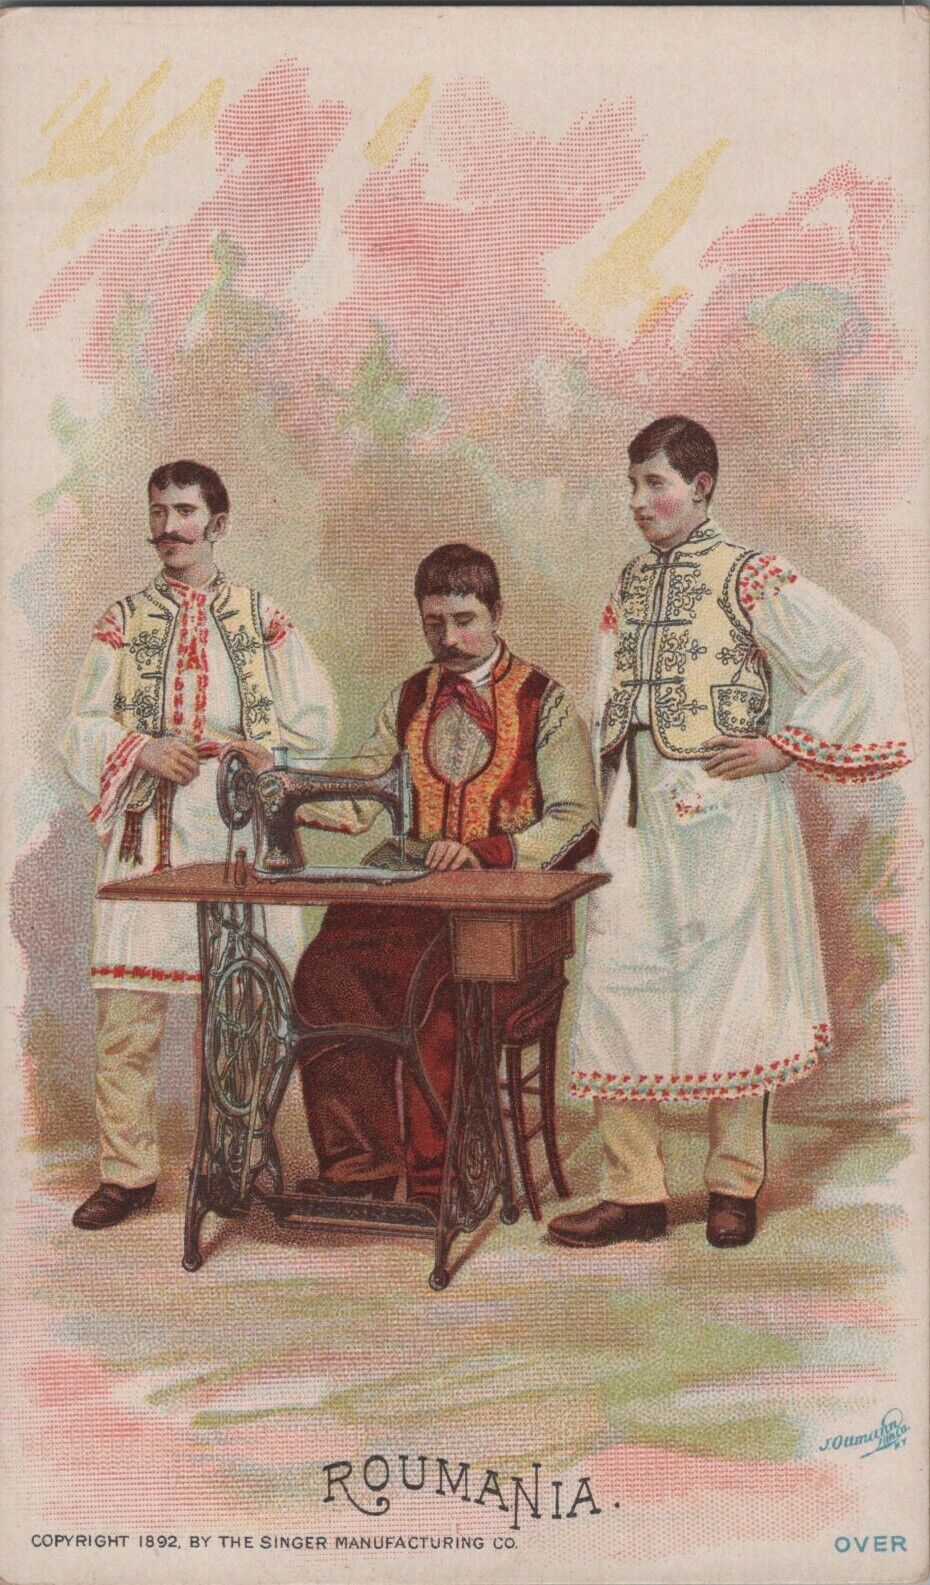 c1892 Singer Mfg. Co. Sewing Trade Card ROUMANIA Costumes of All Nations